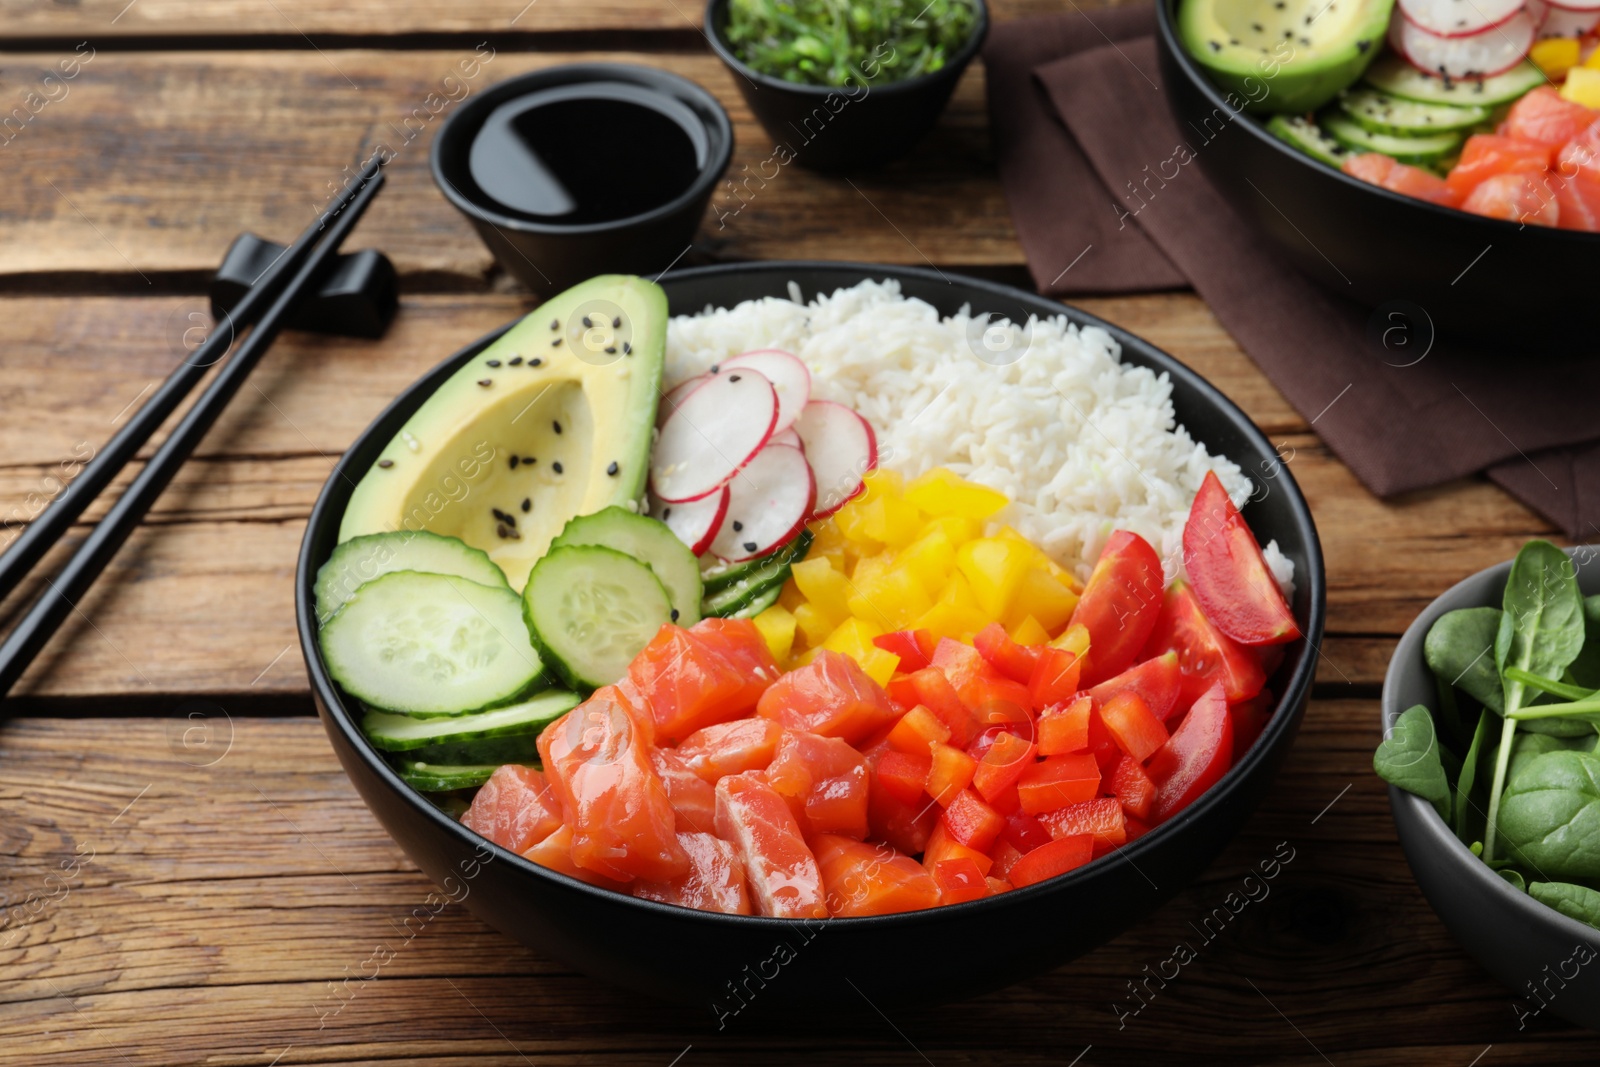 Photo of Delicious poke bowl with salmon and vegetables served on wooden table